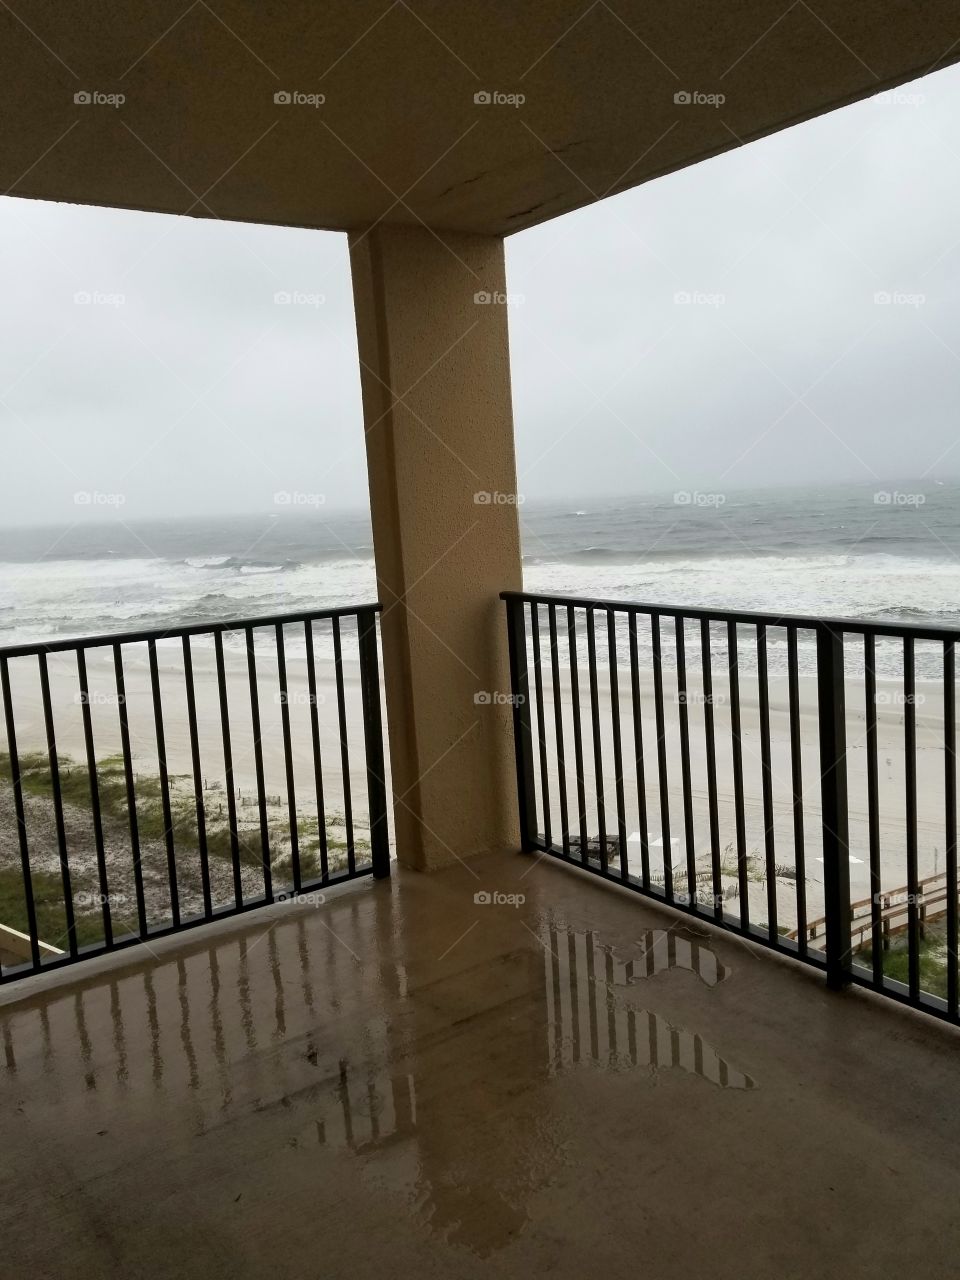 tropical storm, waves, wind, a very gray kind of day